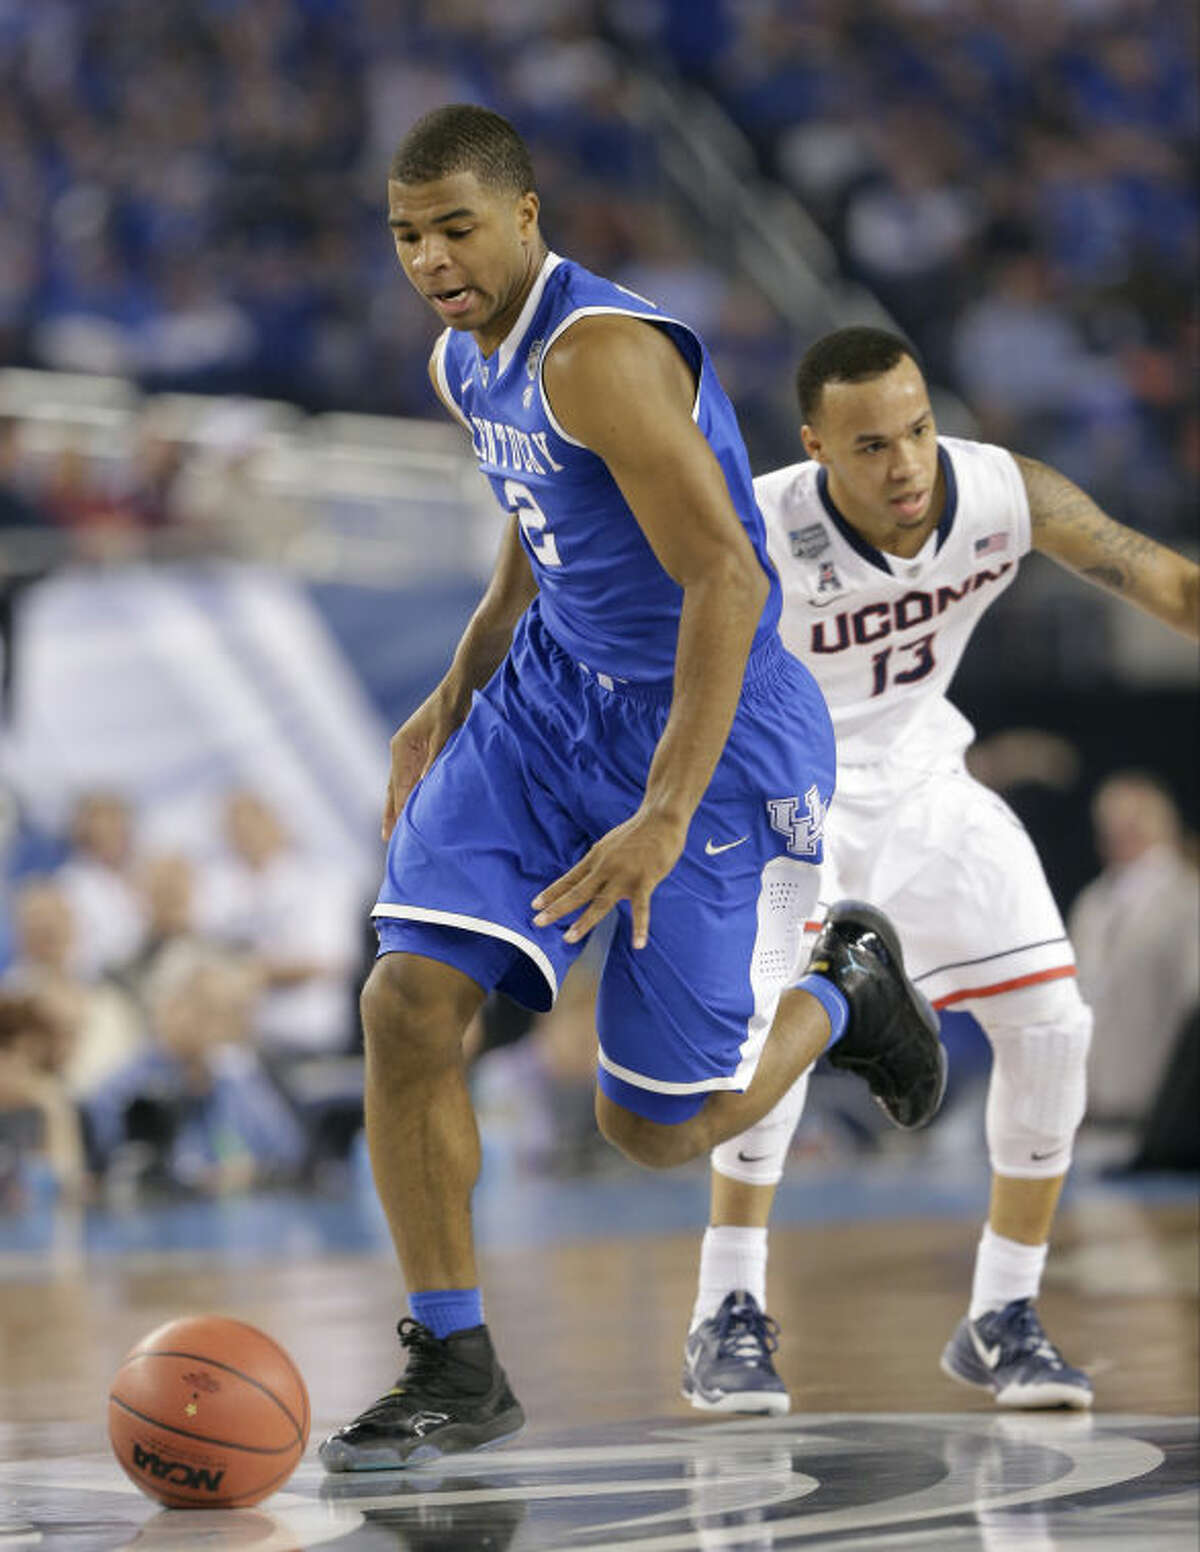 Kentucky guard Aaron Harrison drives up court past Connecticut guard Shabazz Napier, right, during the first half of the NCAA Final Four tournament college basketball championship game Monday, April 7, 2014, in Arlington, Texas. (AP Photo/Eric Gay)